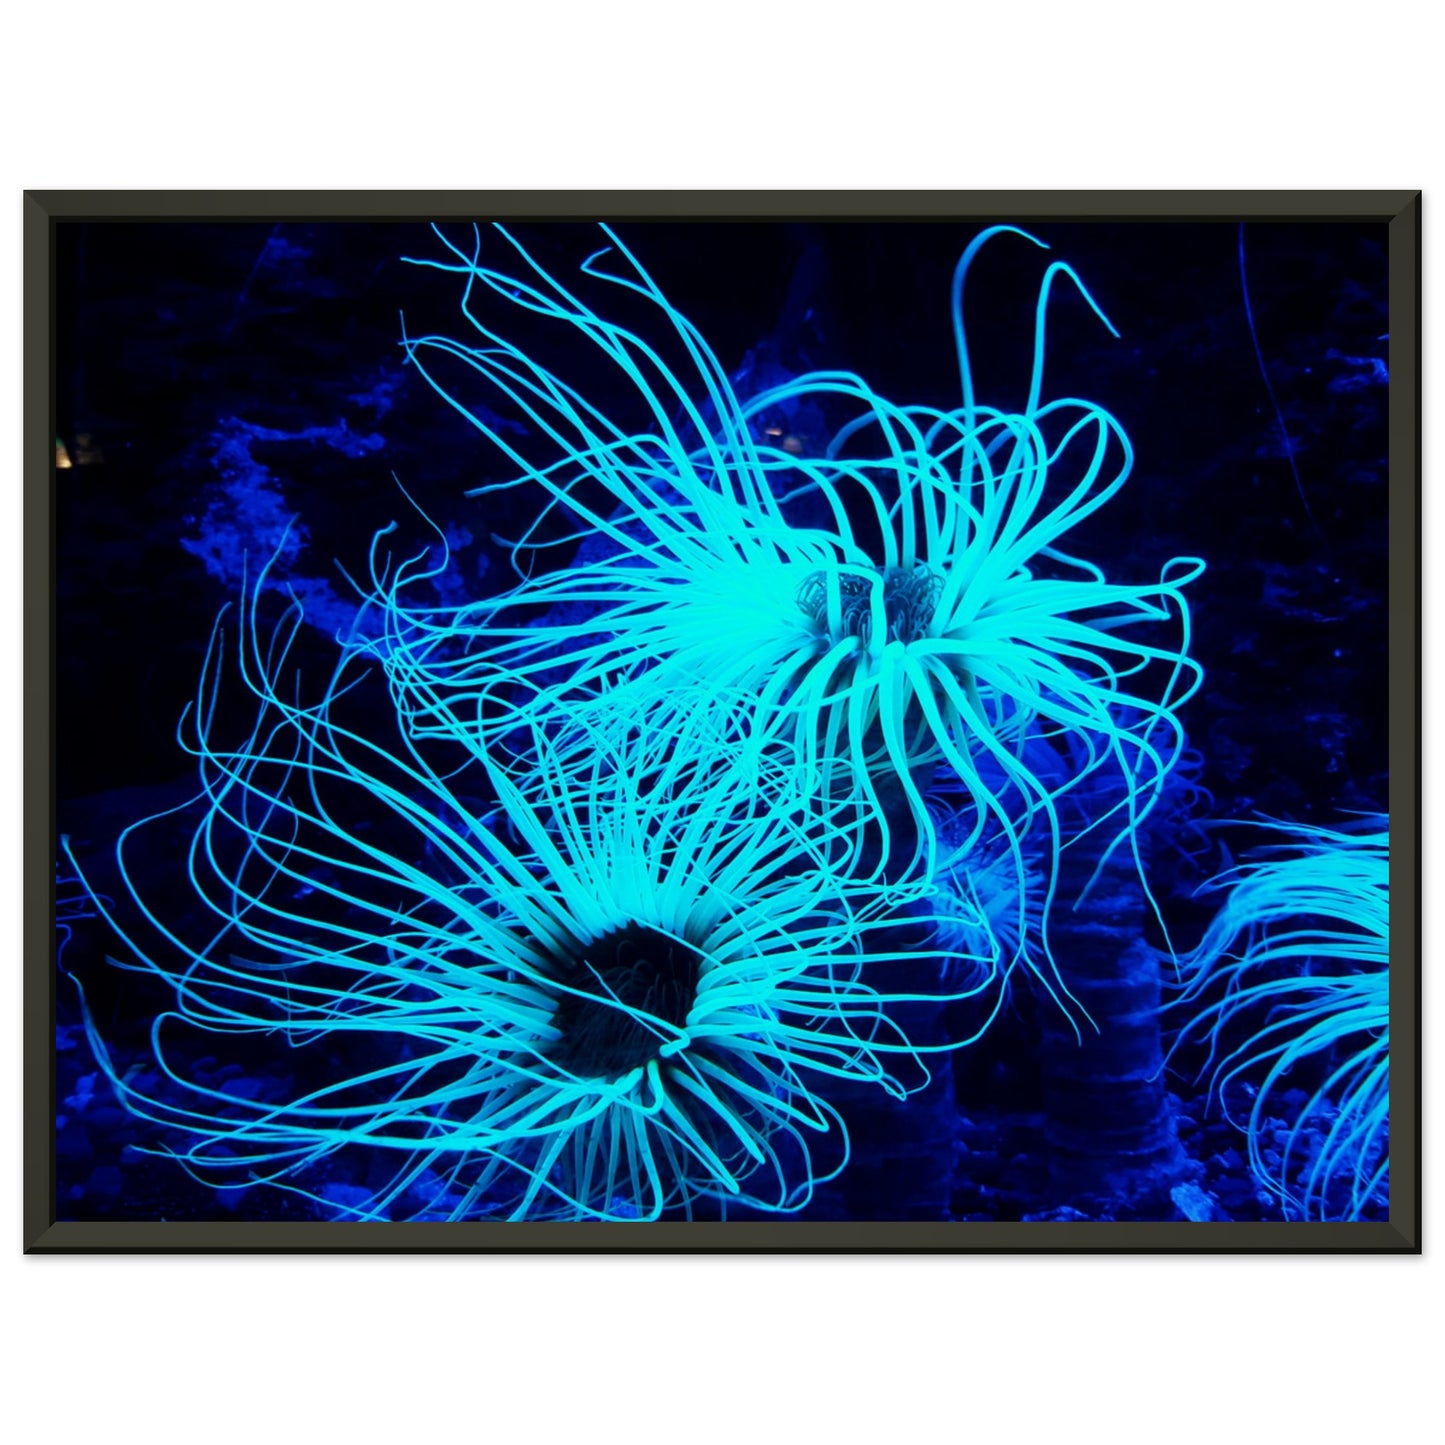 Coral reef bioluminescent plant